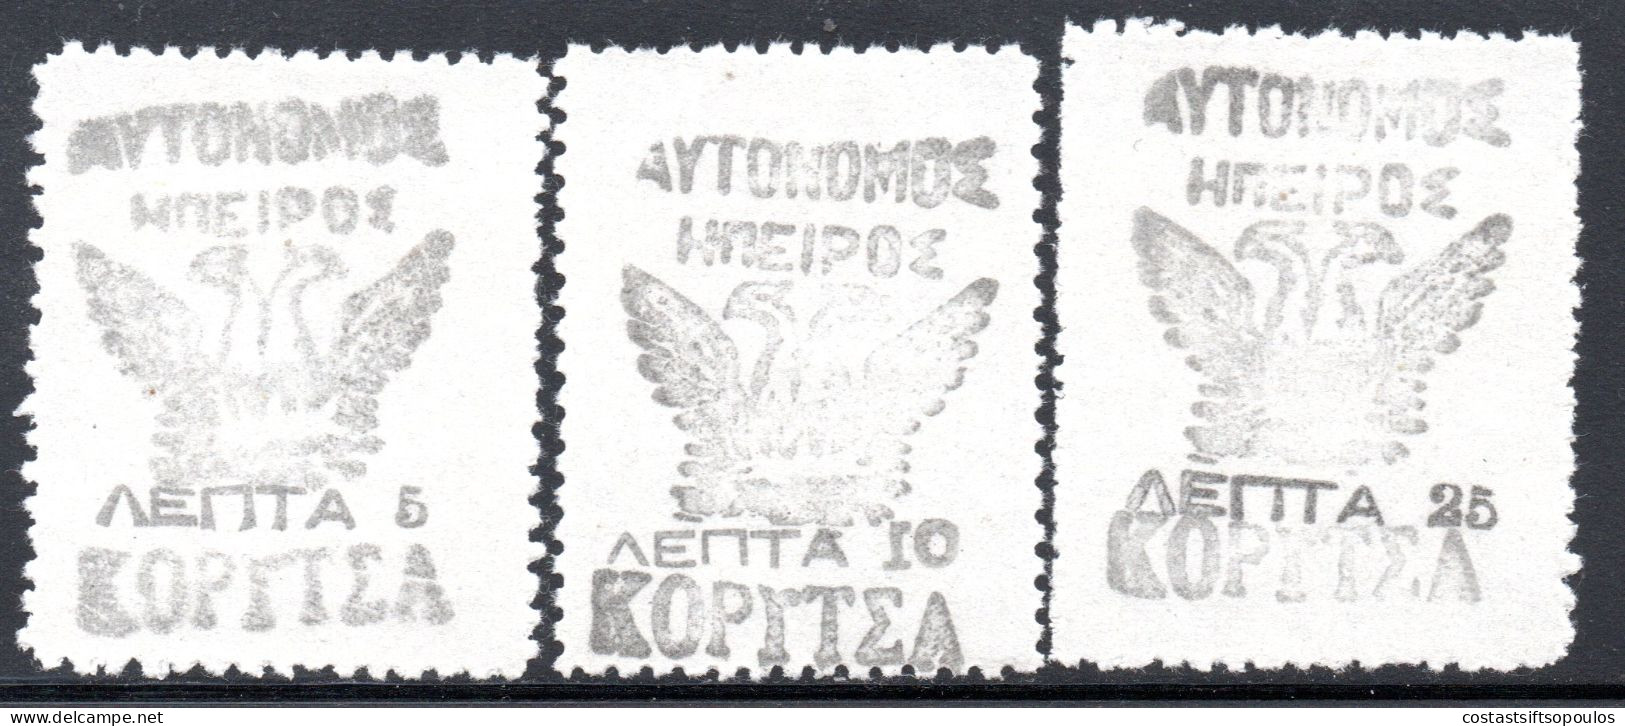 3033.GREECE,ALBANIA,NORTH EPIRUS.1914 KORYTSA UNOFFICIAL ISSUE,WITHOUT GUM AS ISSUED - North Epirus